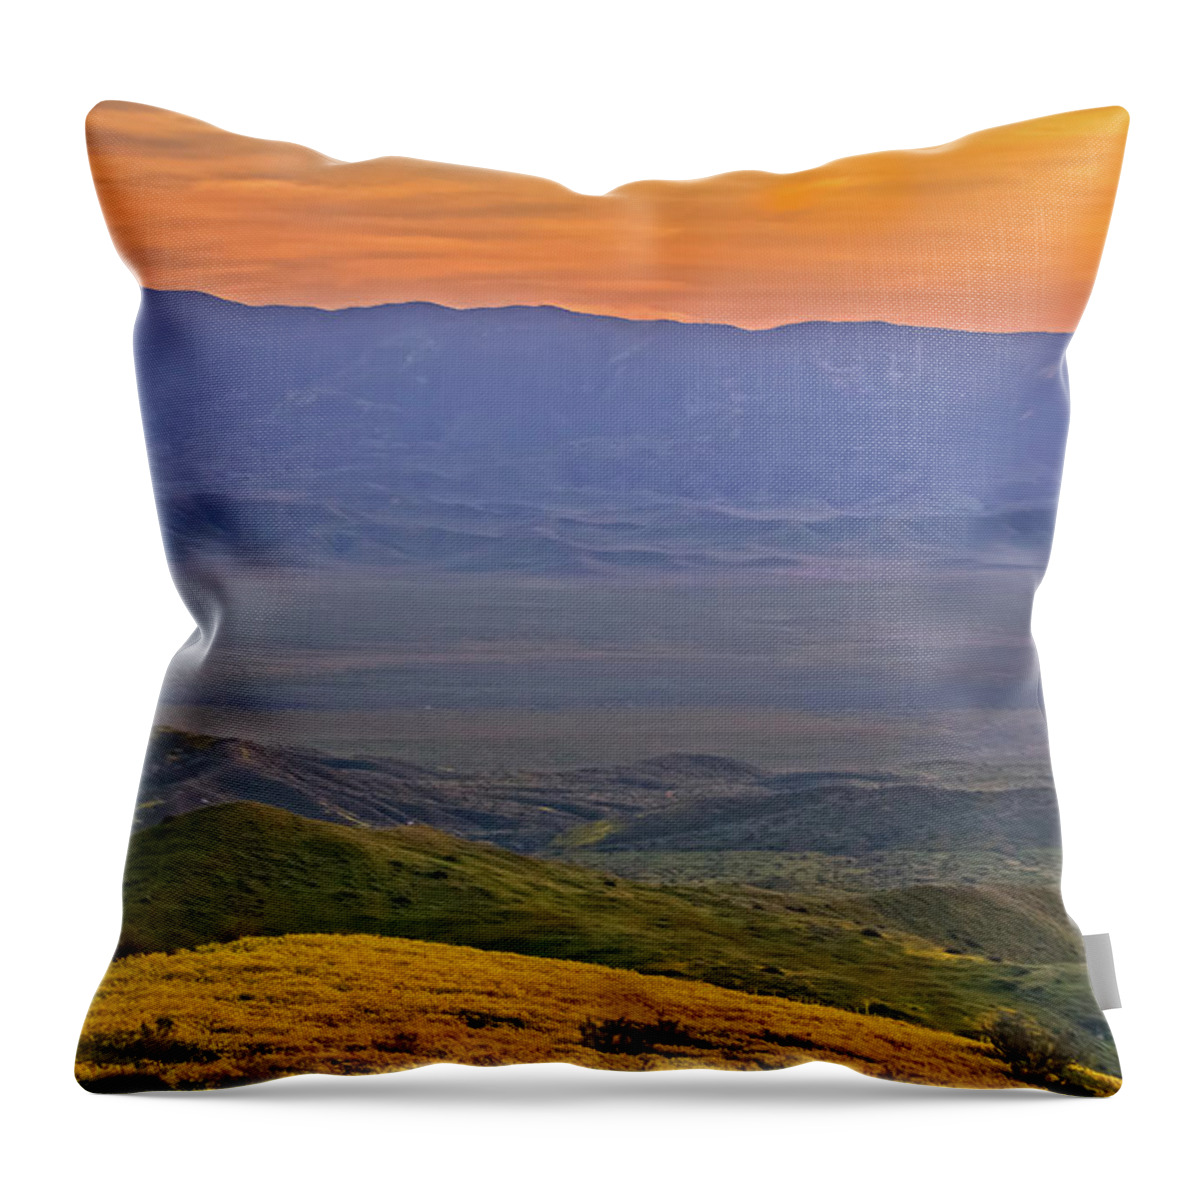 California Throw Pillow featuring the photograph Across the Carrizo Plain at Sunset by Marc Crumpler